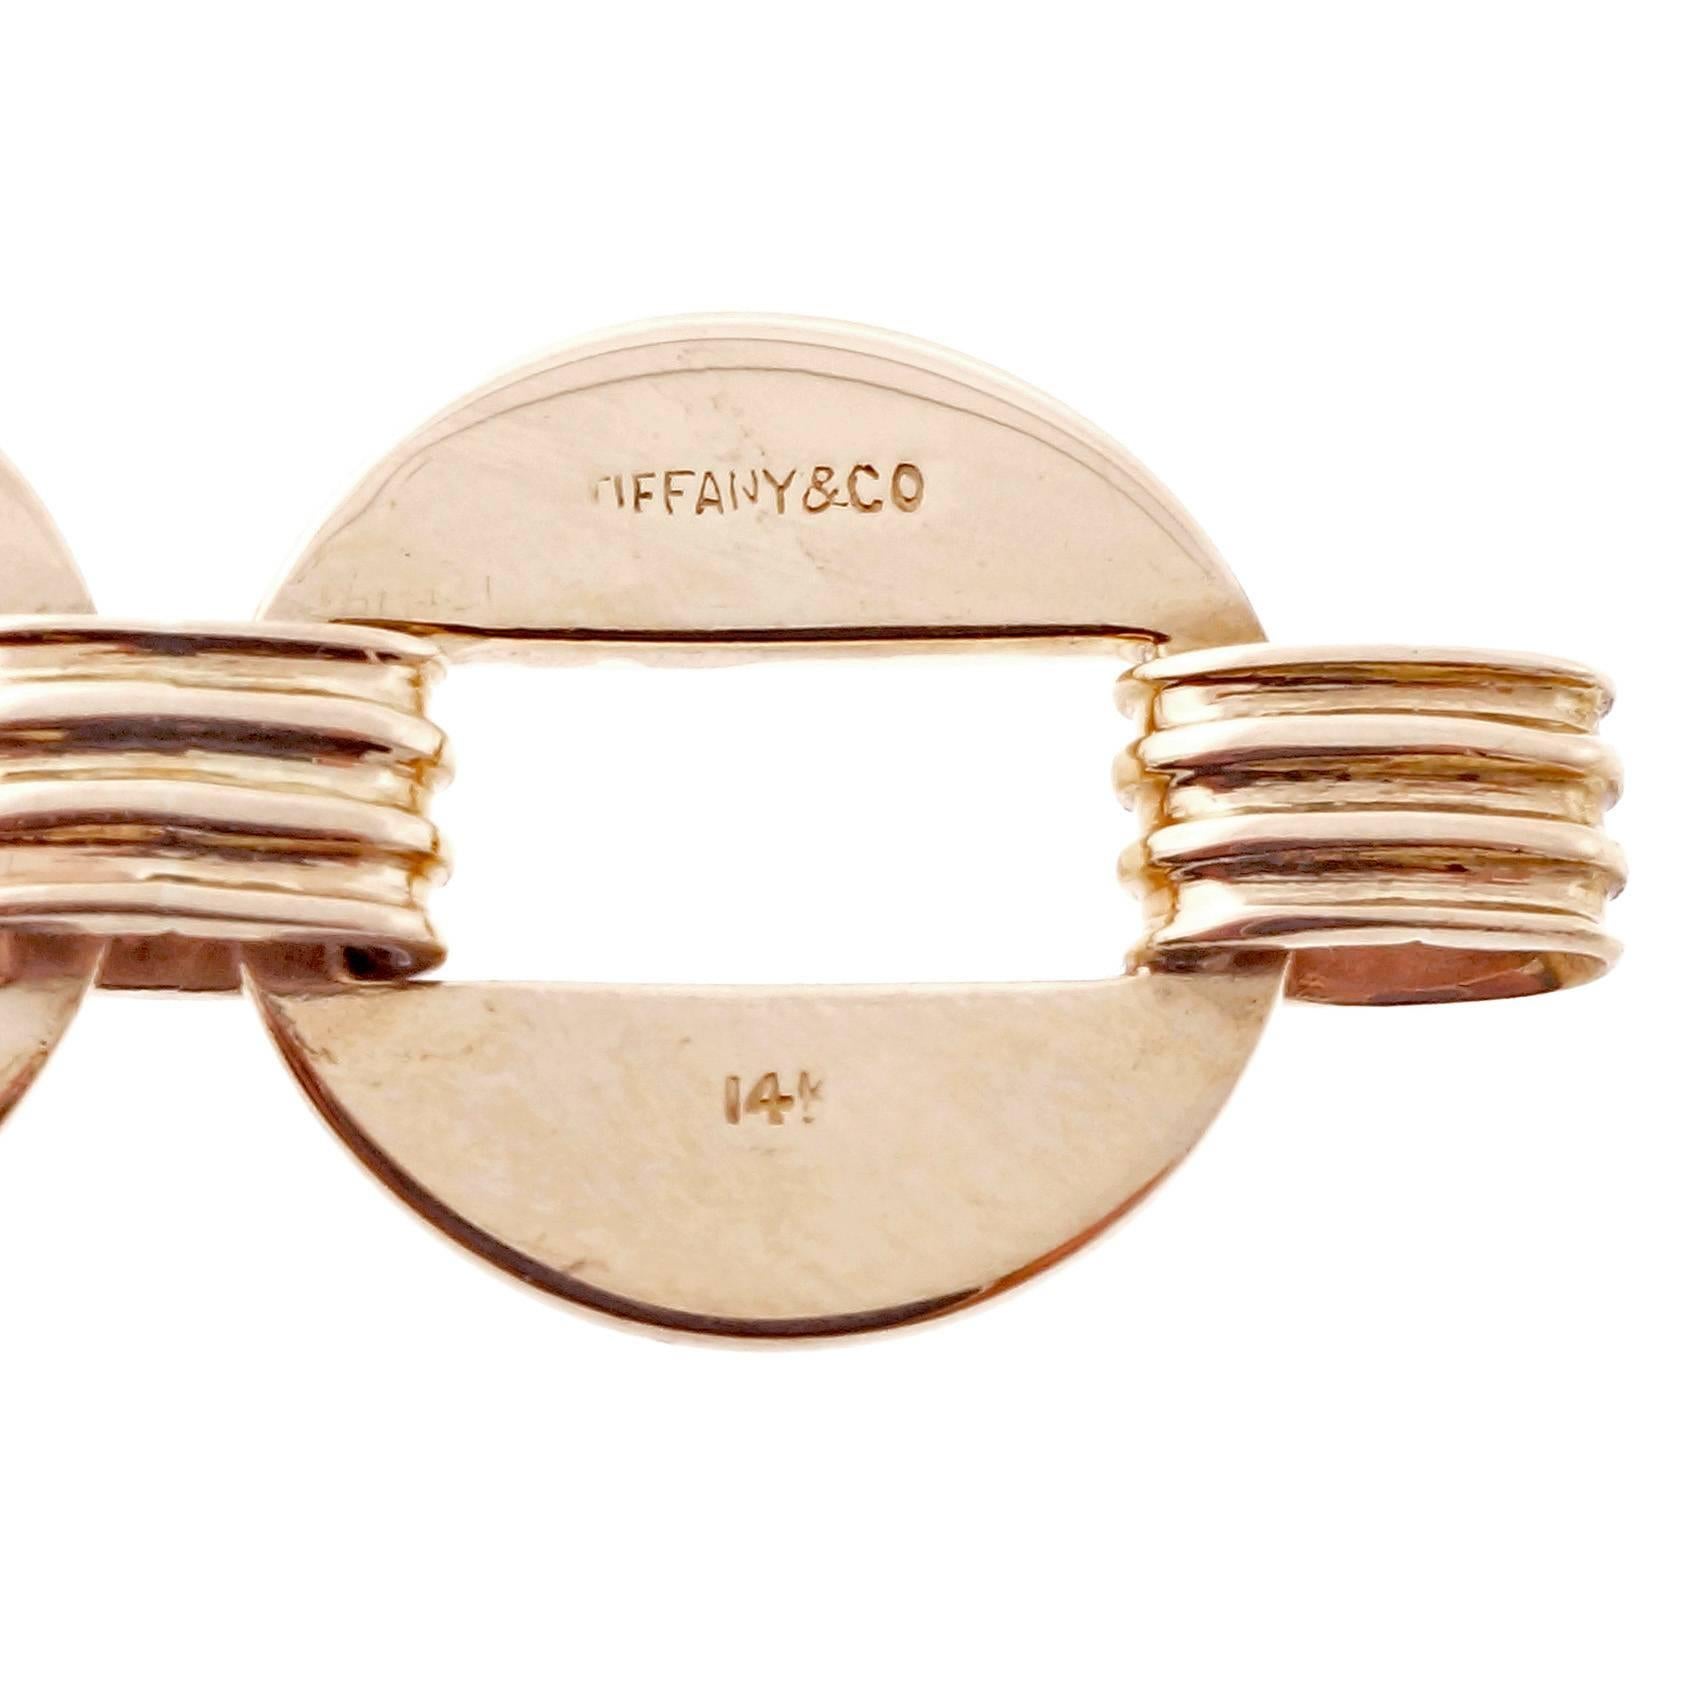 Tiffany & Co. 1940’s 14k yellow gold link bracelet.

14k yellow gold
Tested and stamped: 14k
31.3 grams
Width: 15.60mm or .70 inch
Hallmark: Tiffany & Co.
Chain: Length: 7.5 inches – Width: 5.60mm - Depth: 4.36mm
